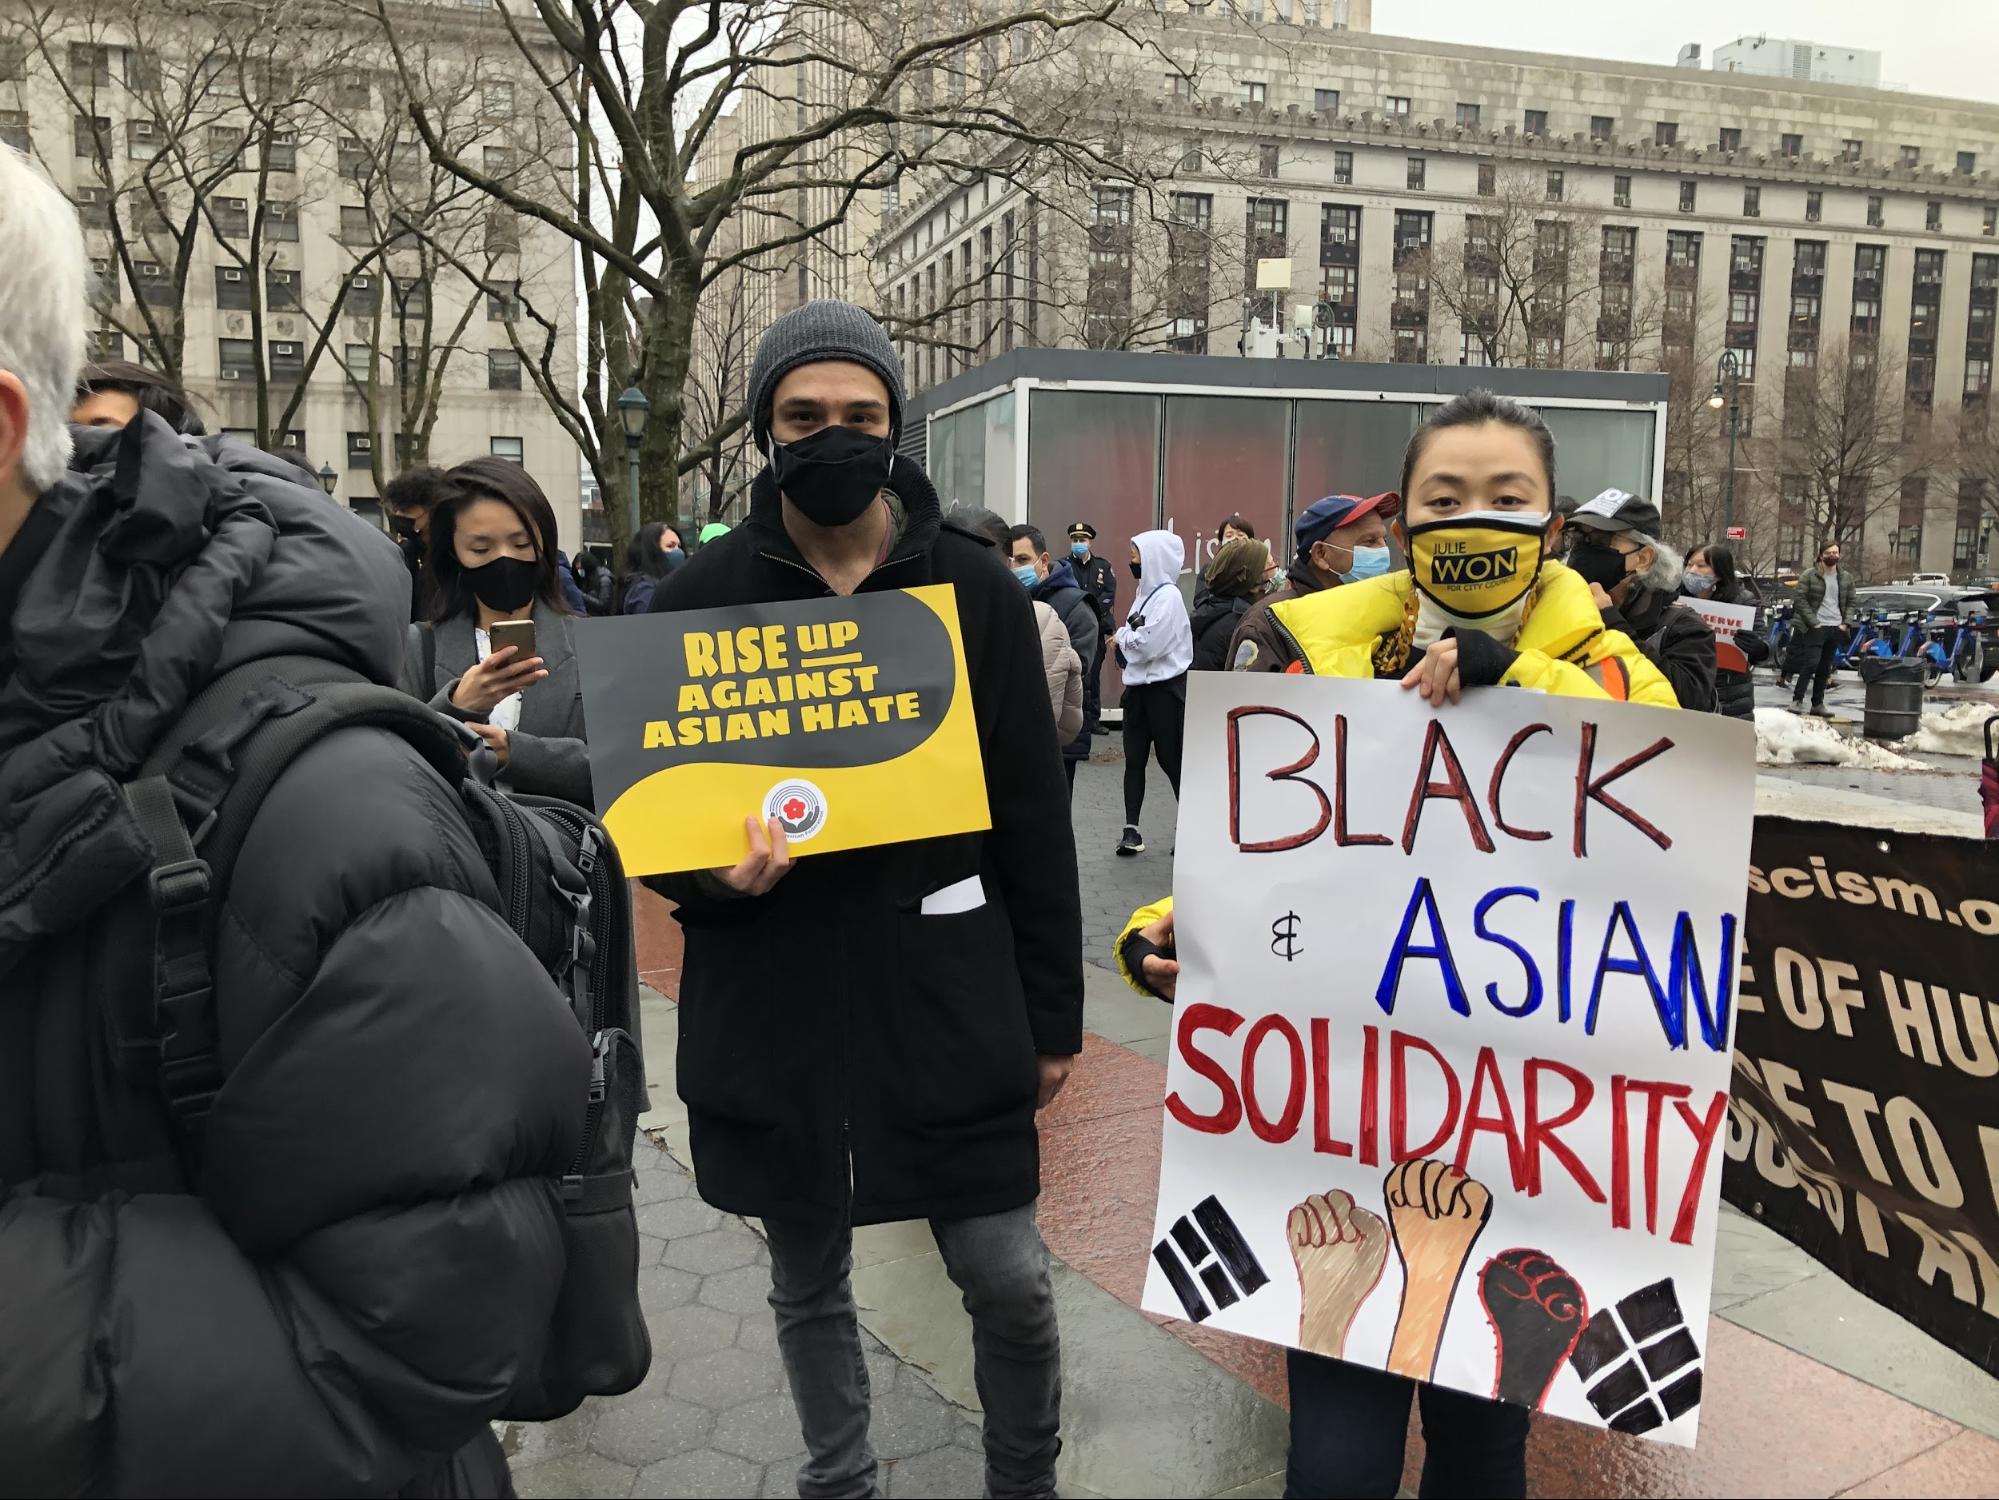 People hold signs at the rally, including a sign that says "Black and Asian Solidarity"